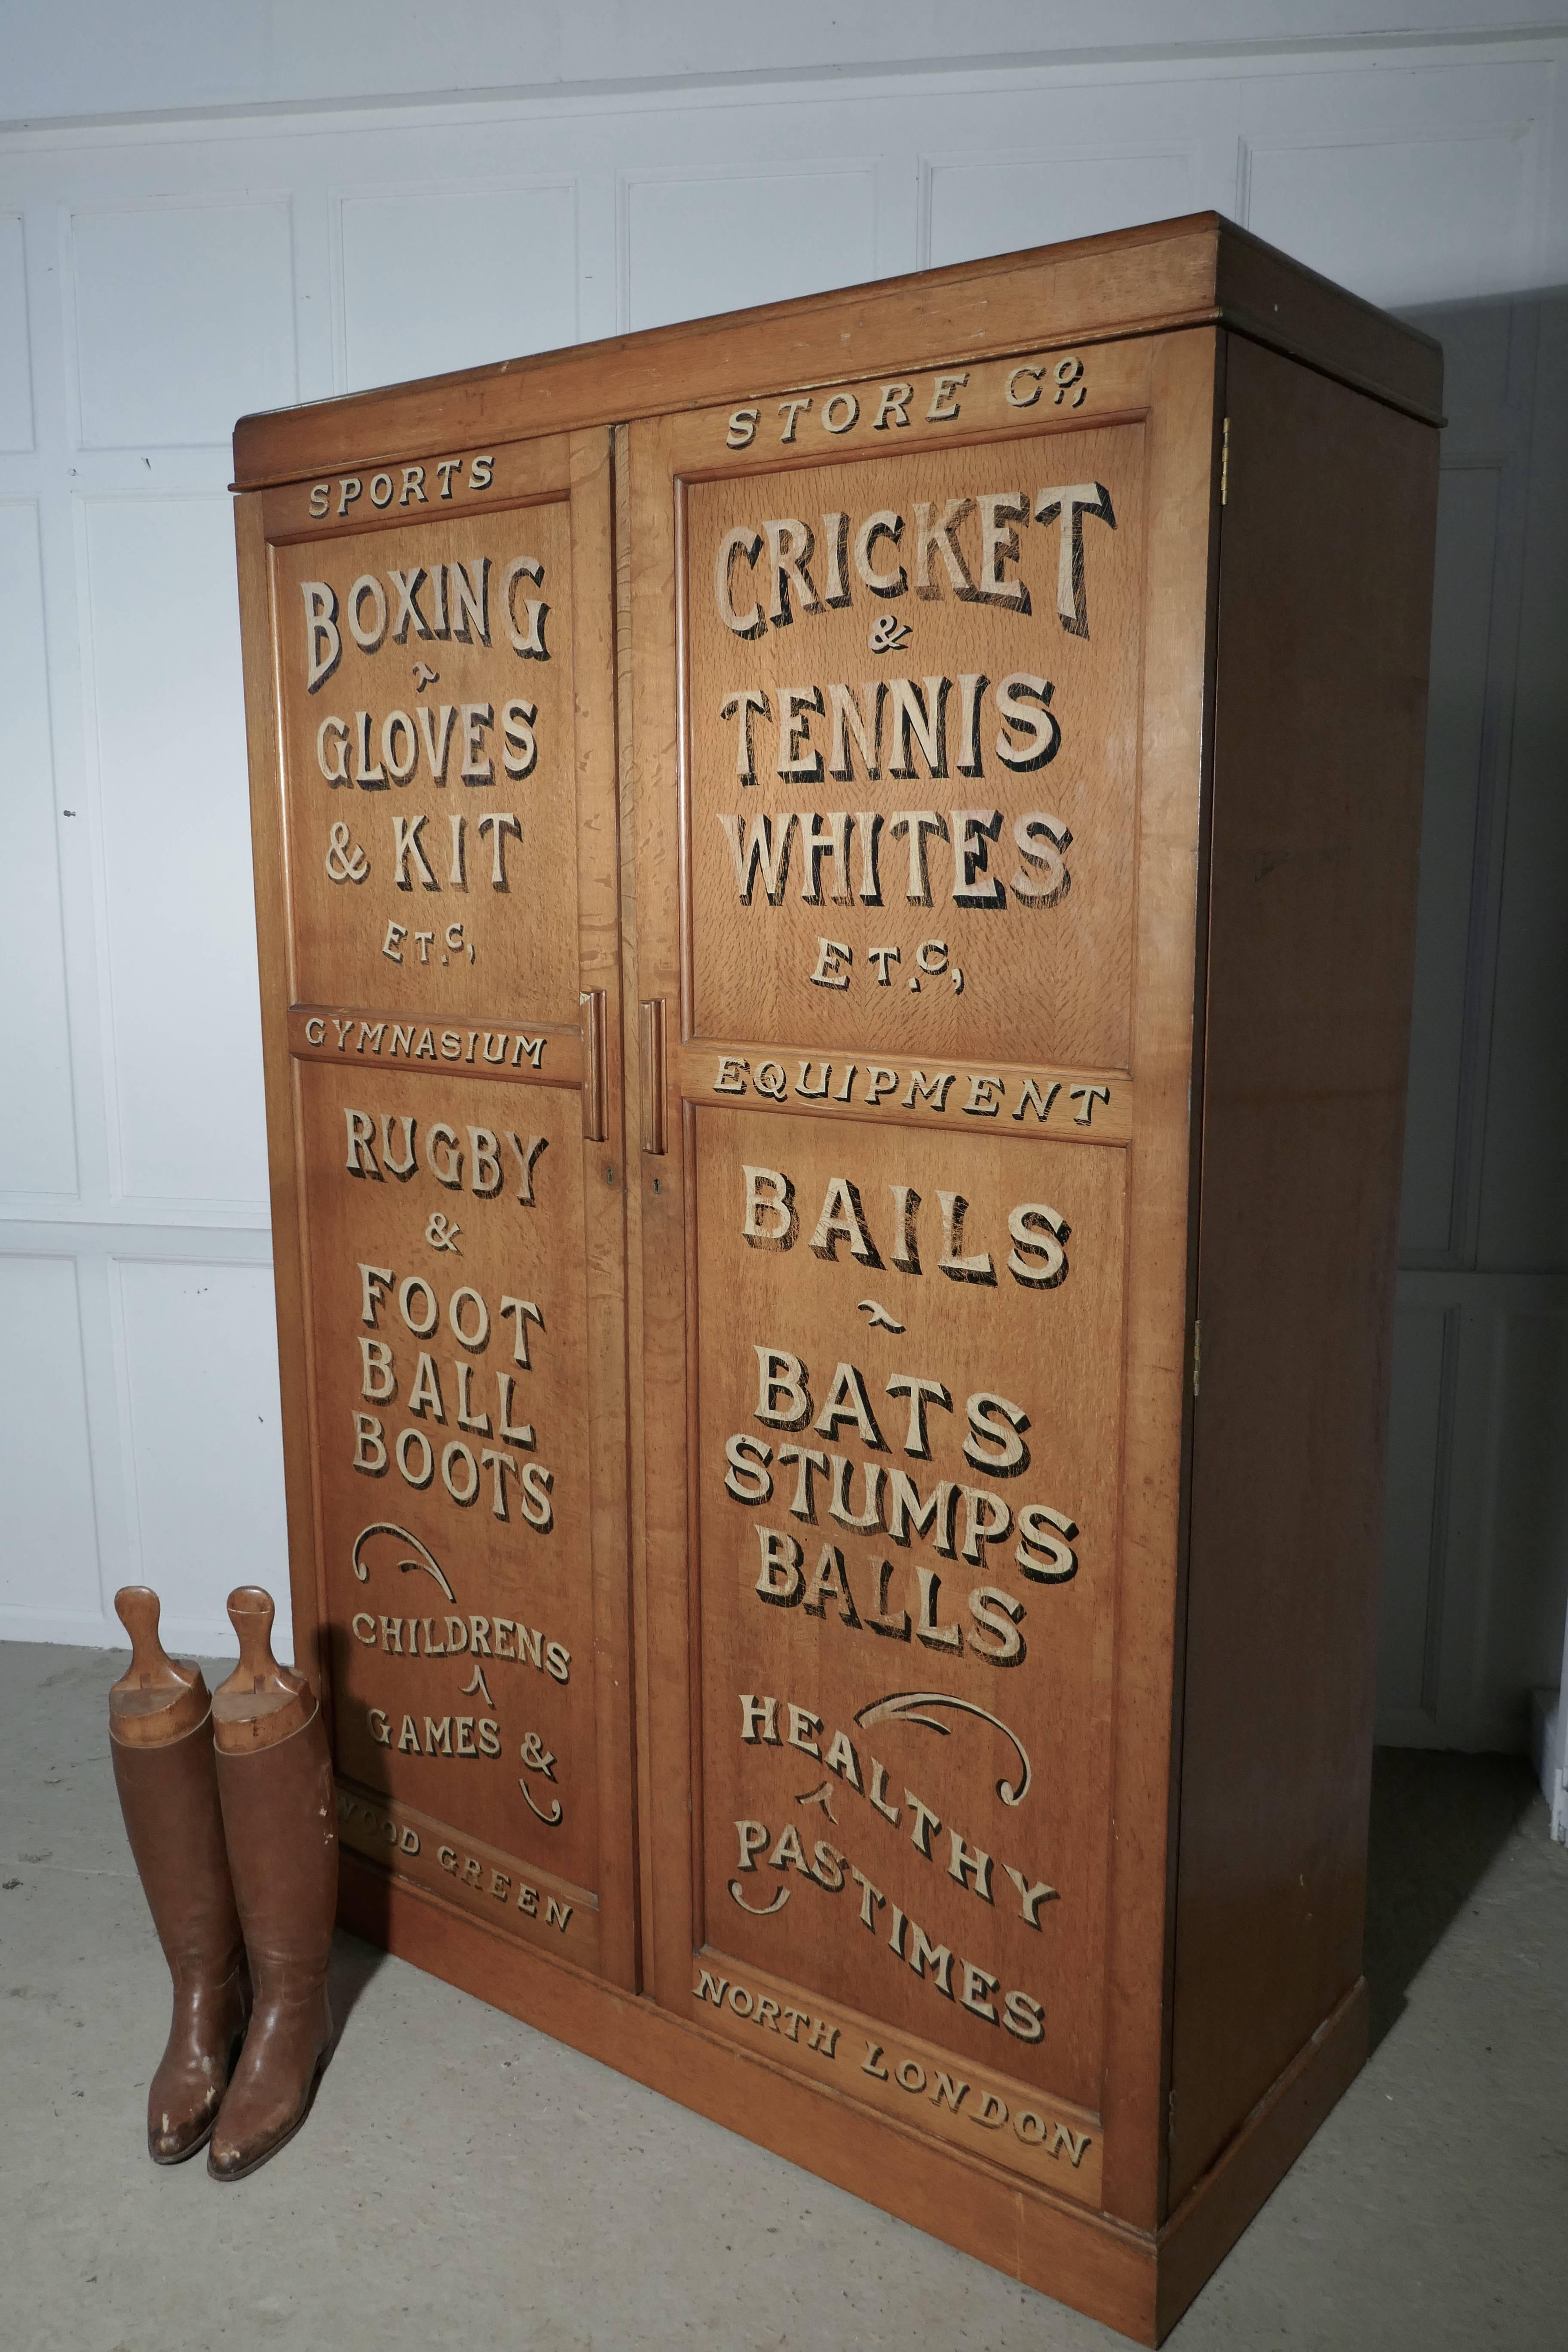 A magnificent early 19th century cupboard, for storing a variety of sports equipment, tennis, cricket, boxing, football and rugby.

The double door cupboard is made in golden oak, one side has five open shelves, the other has many coat hooks and